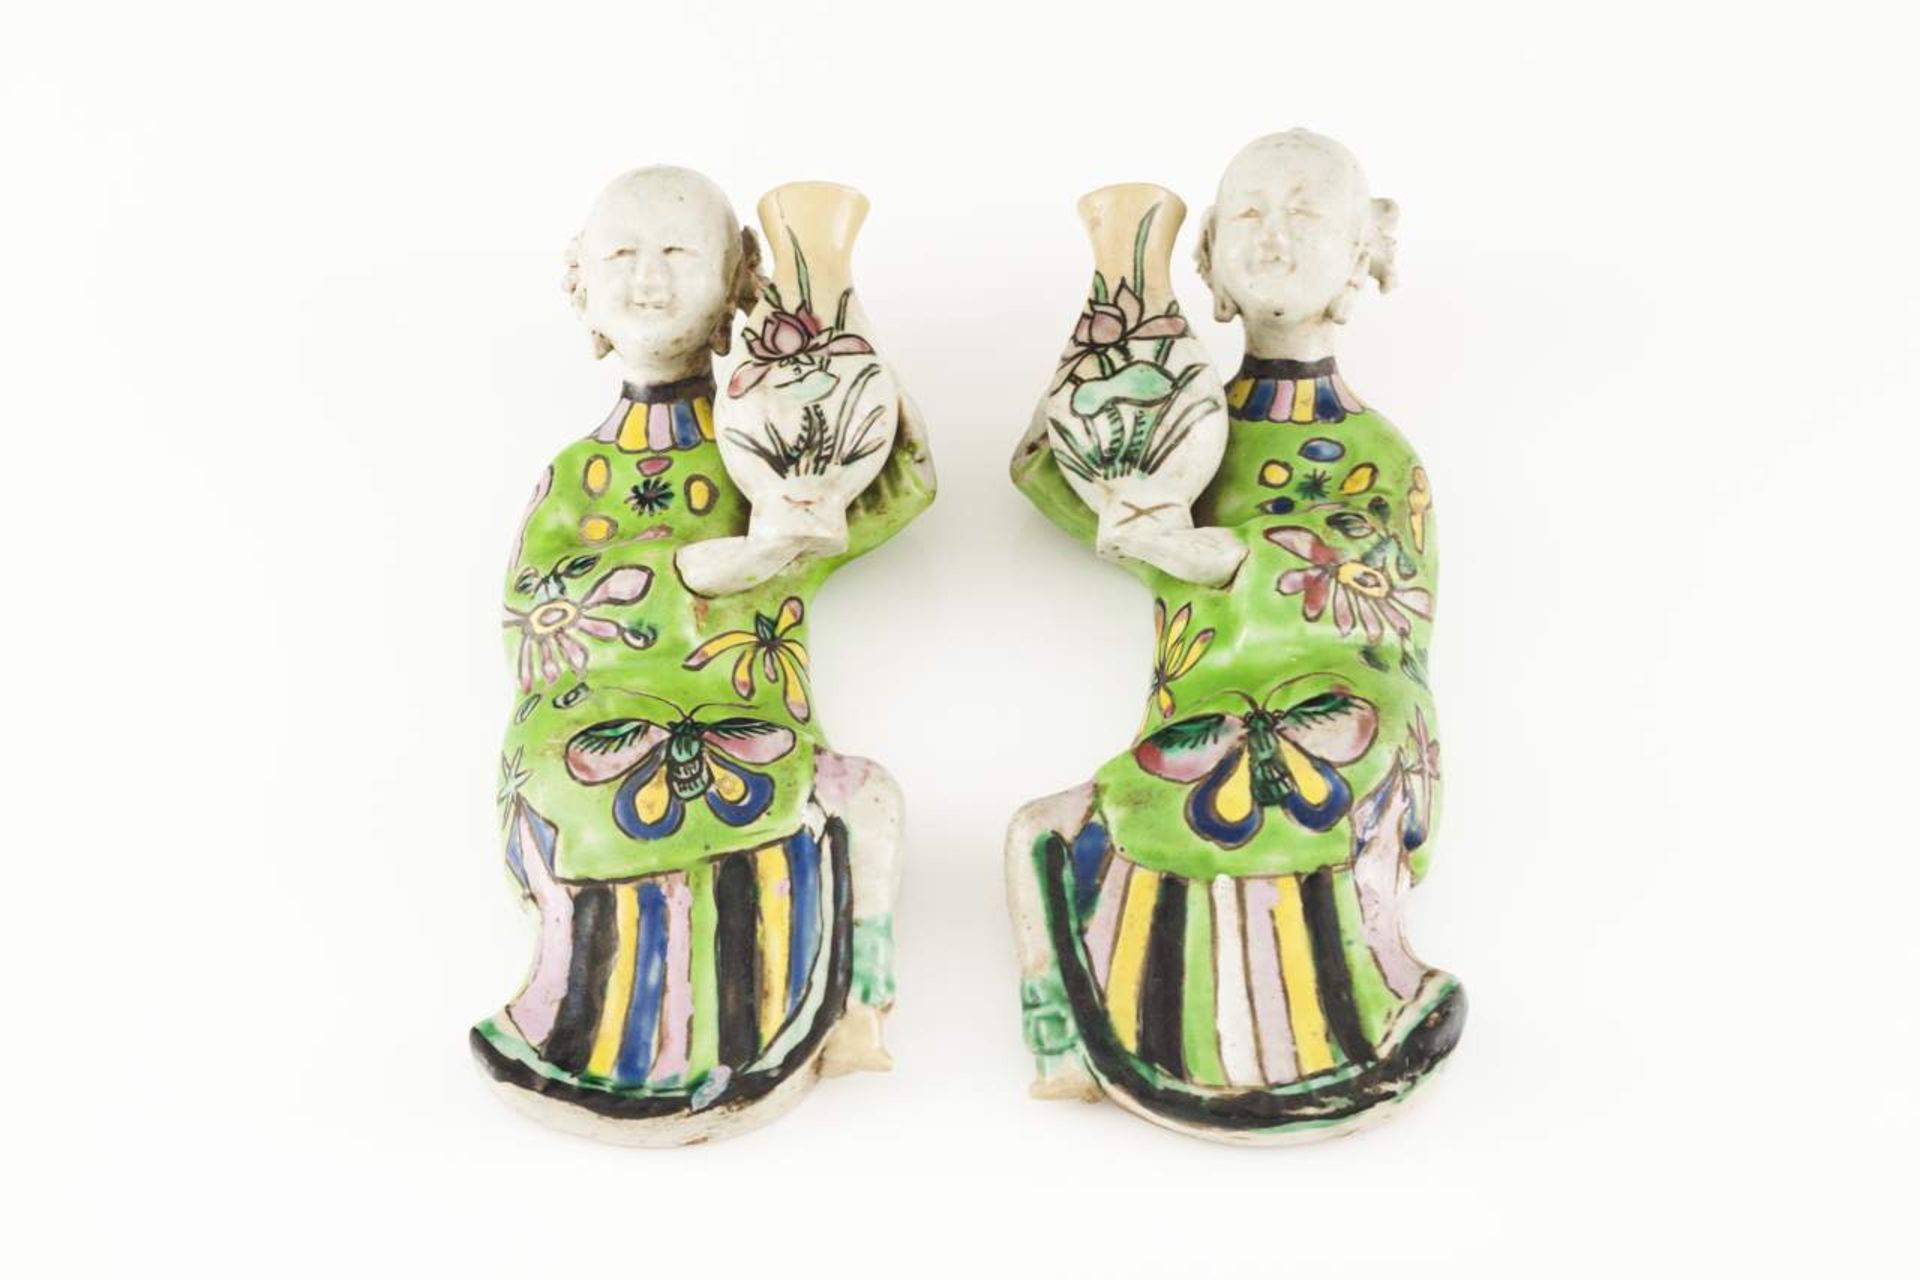 A pair of Jiaqing figures
Chinese porcelain
Polychrome decorated suspension sculptures
Jiaqing